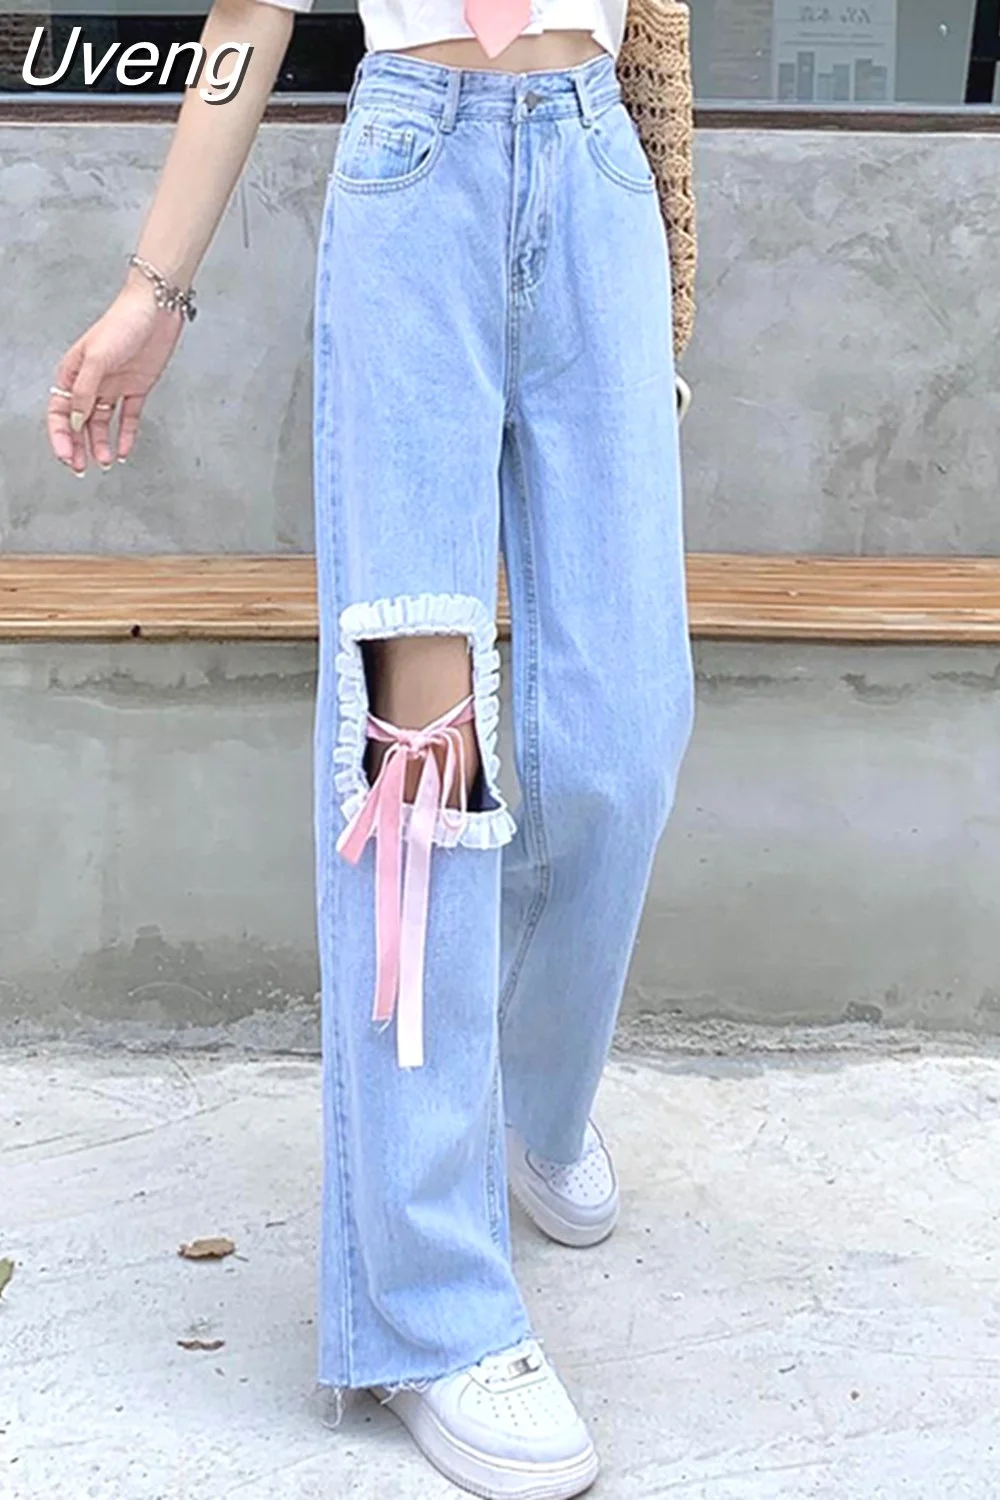 Uveng Women Ripped Jeans Korean Bow Tie Bandage Loose Wide Leg Pants Summer Fashion Female All Match Student Denim Trousers